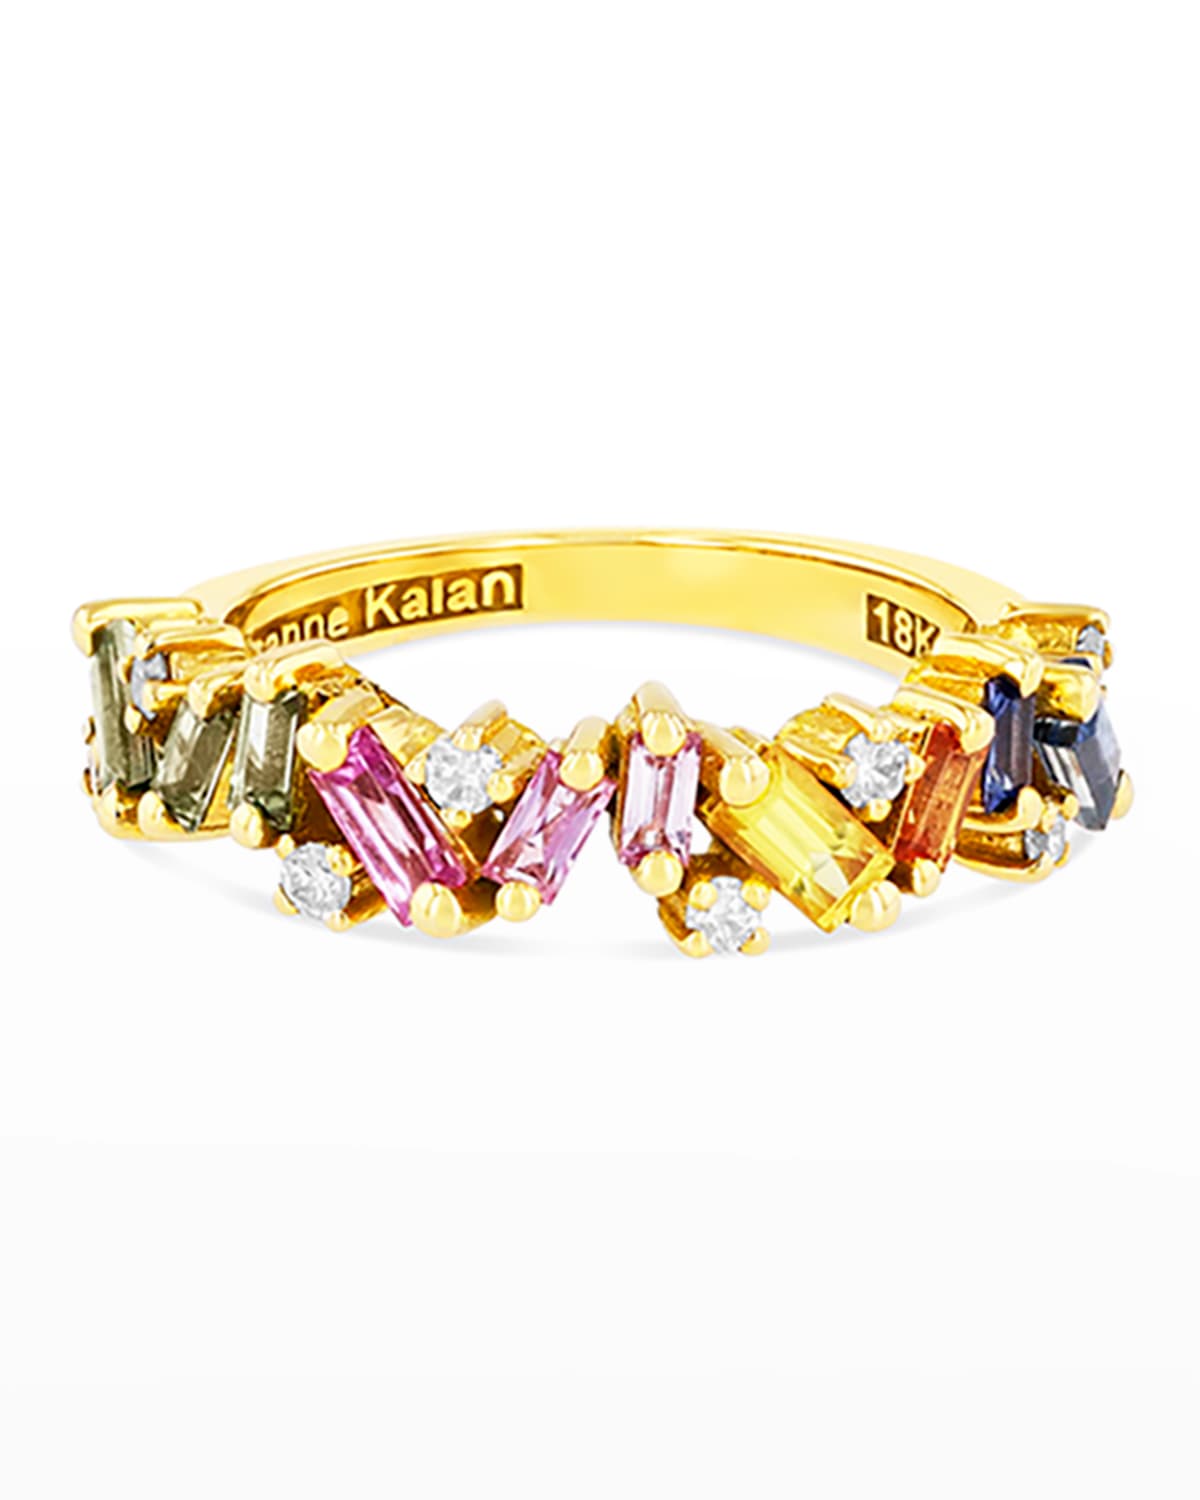 Suzanne Kalan Pastel Sapphire Frenzy Half-band Ring Size 4-8 In Yellow/gold